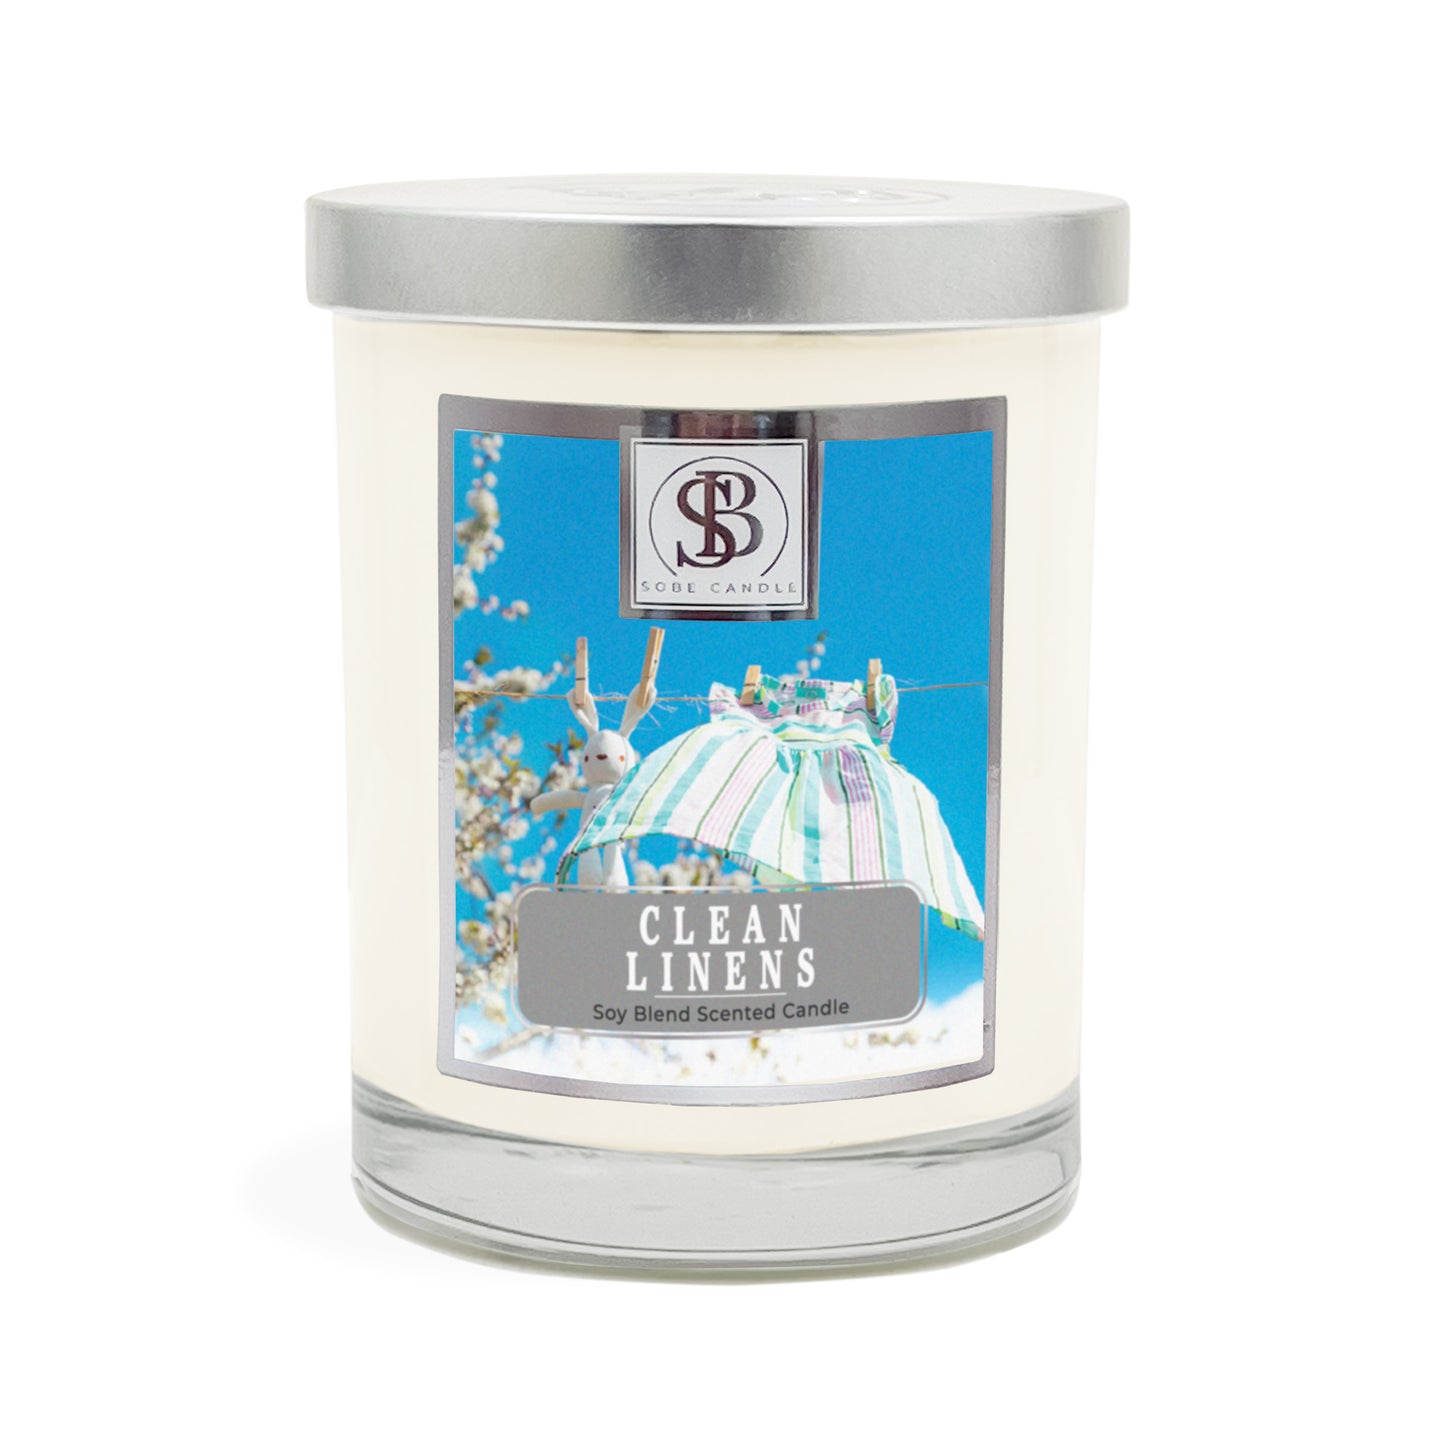 CLEAN LINENS | Soy Scented Candle 11 oz